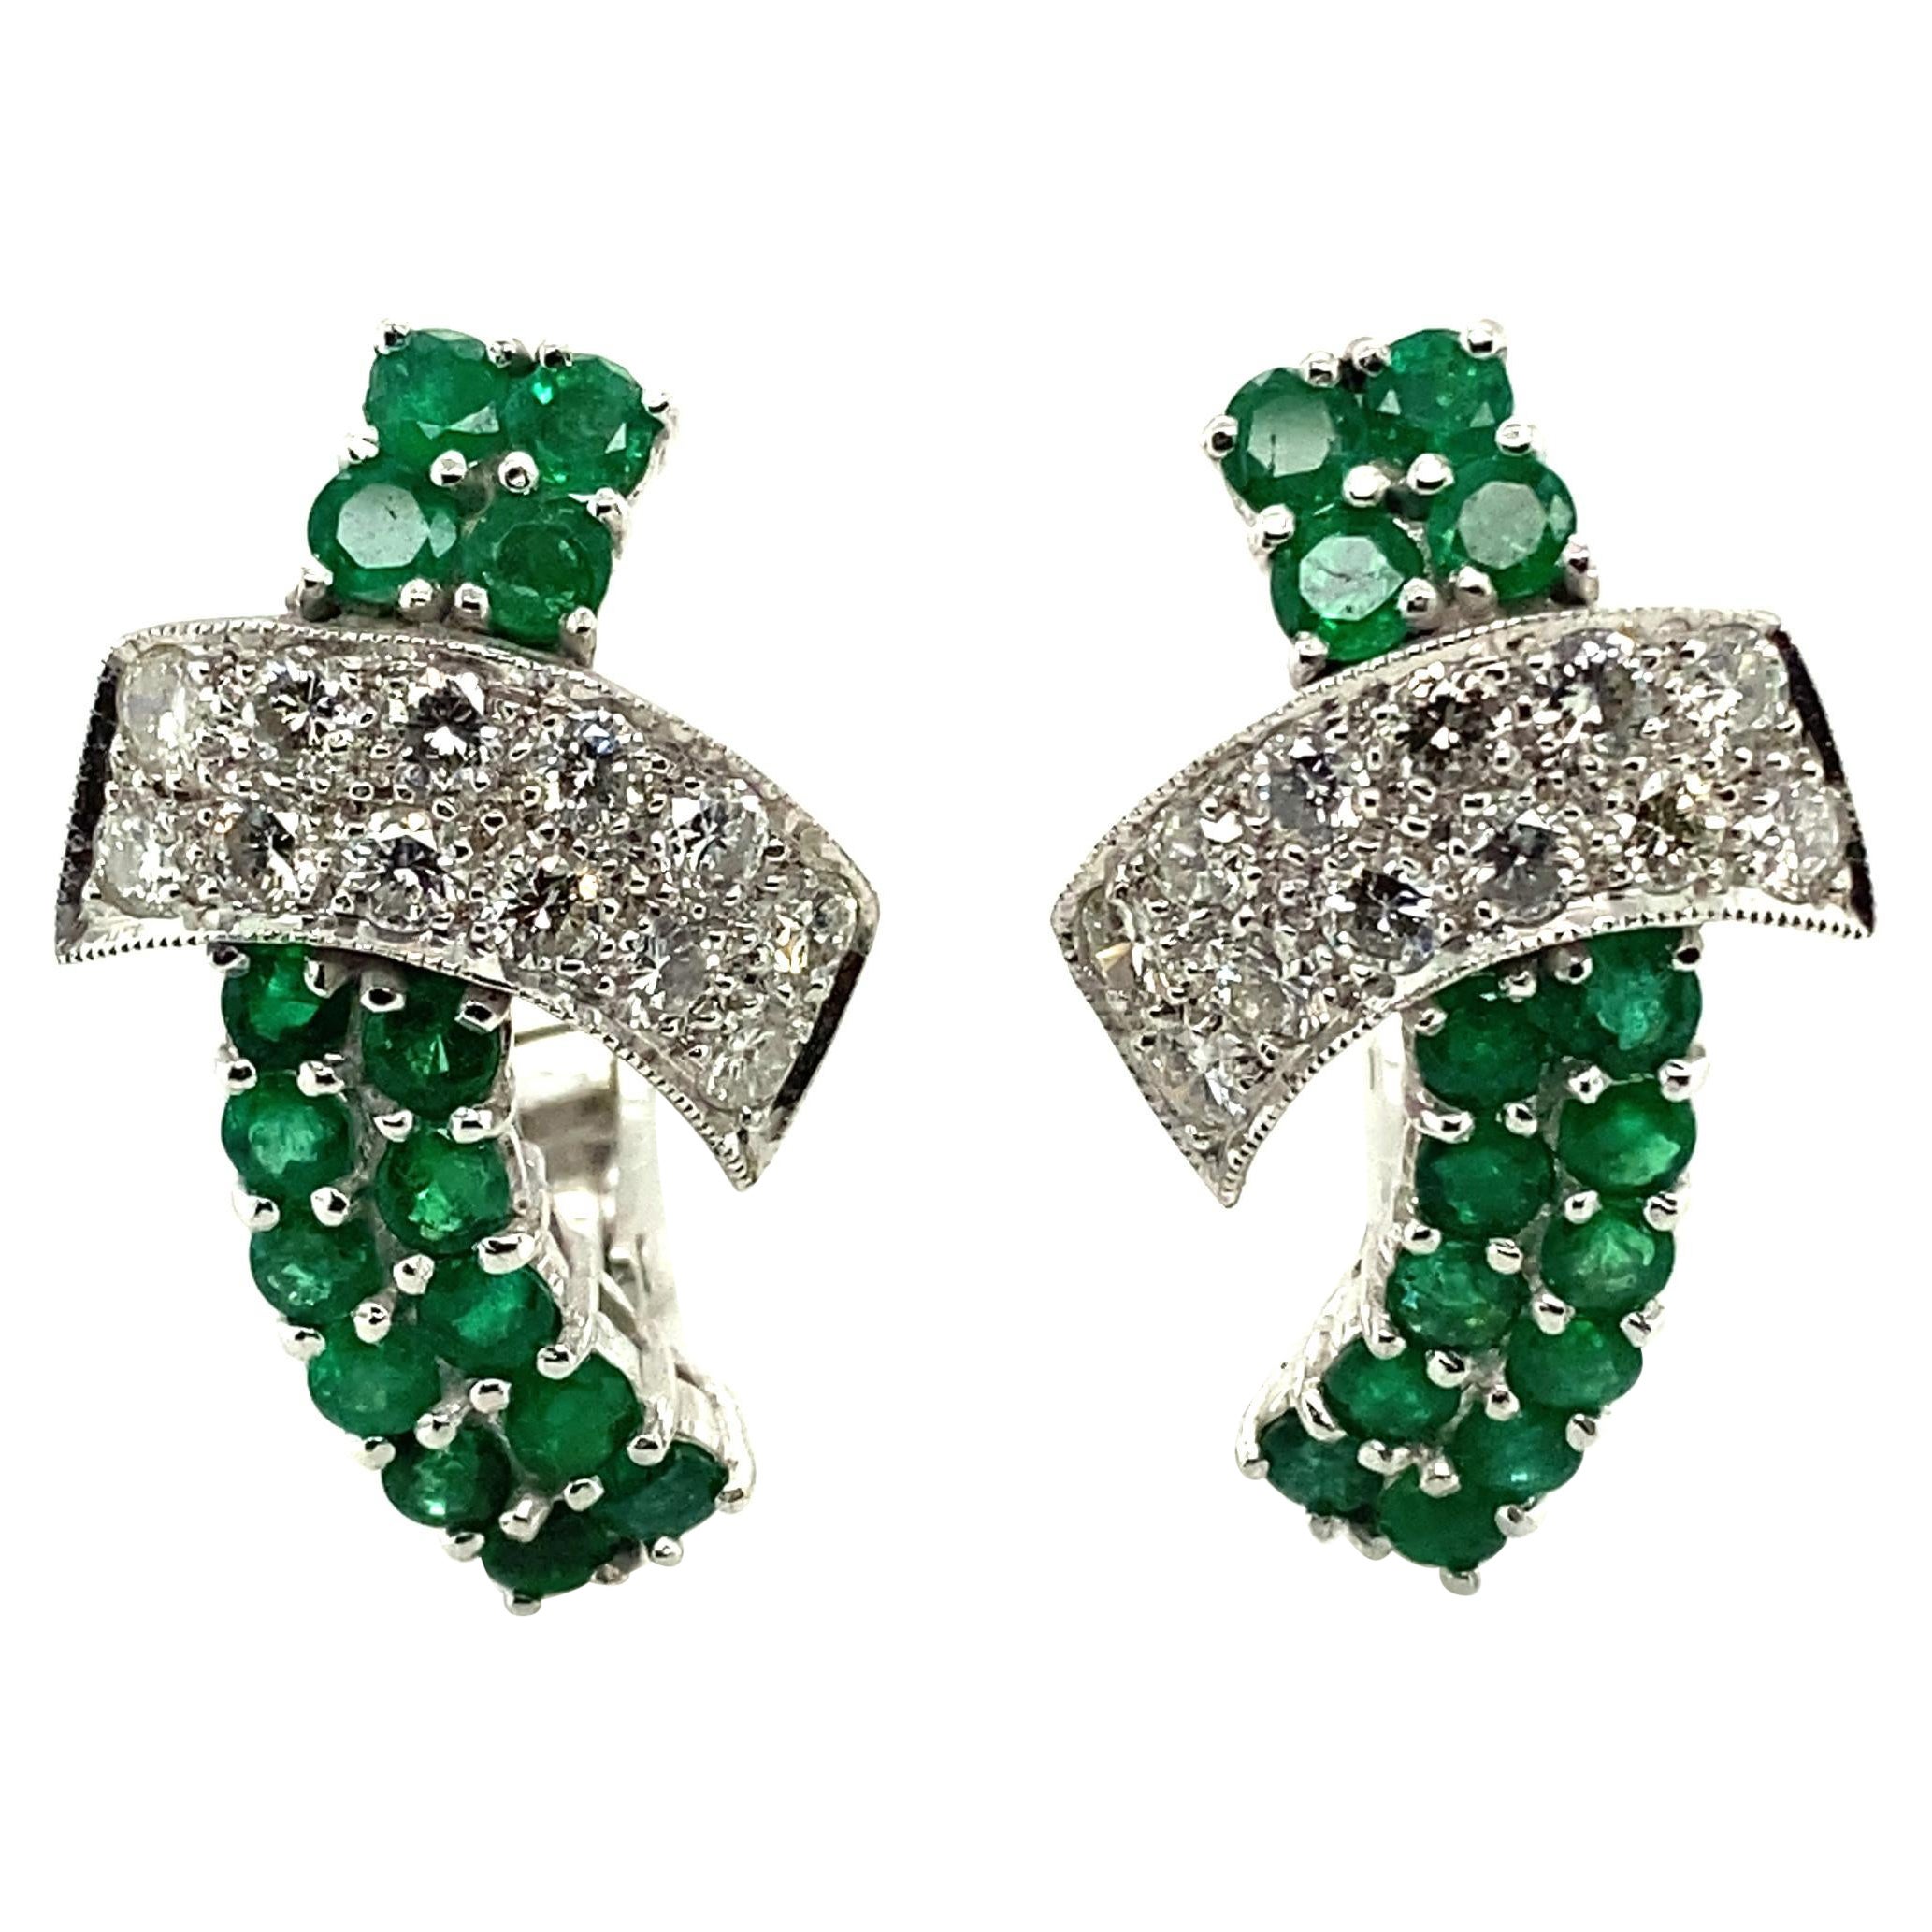 Emerald and Diamond Earclips in 18 Karat White Gold